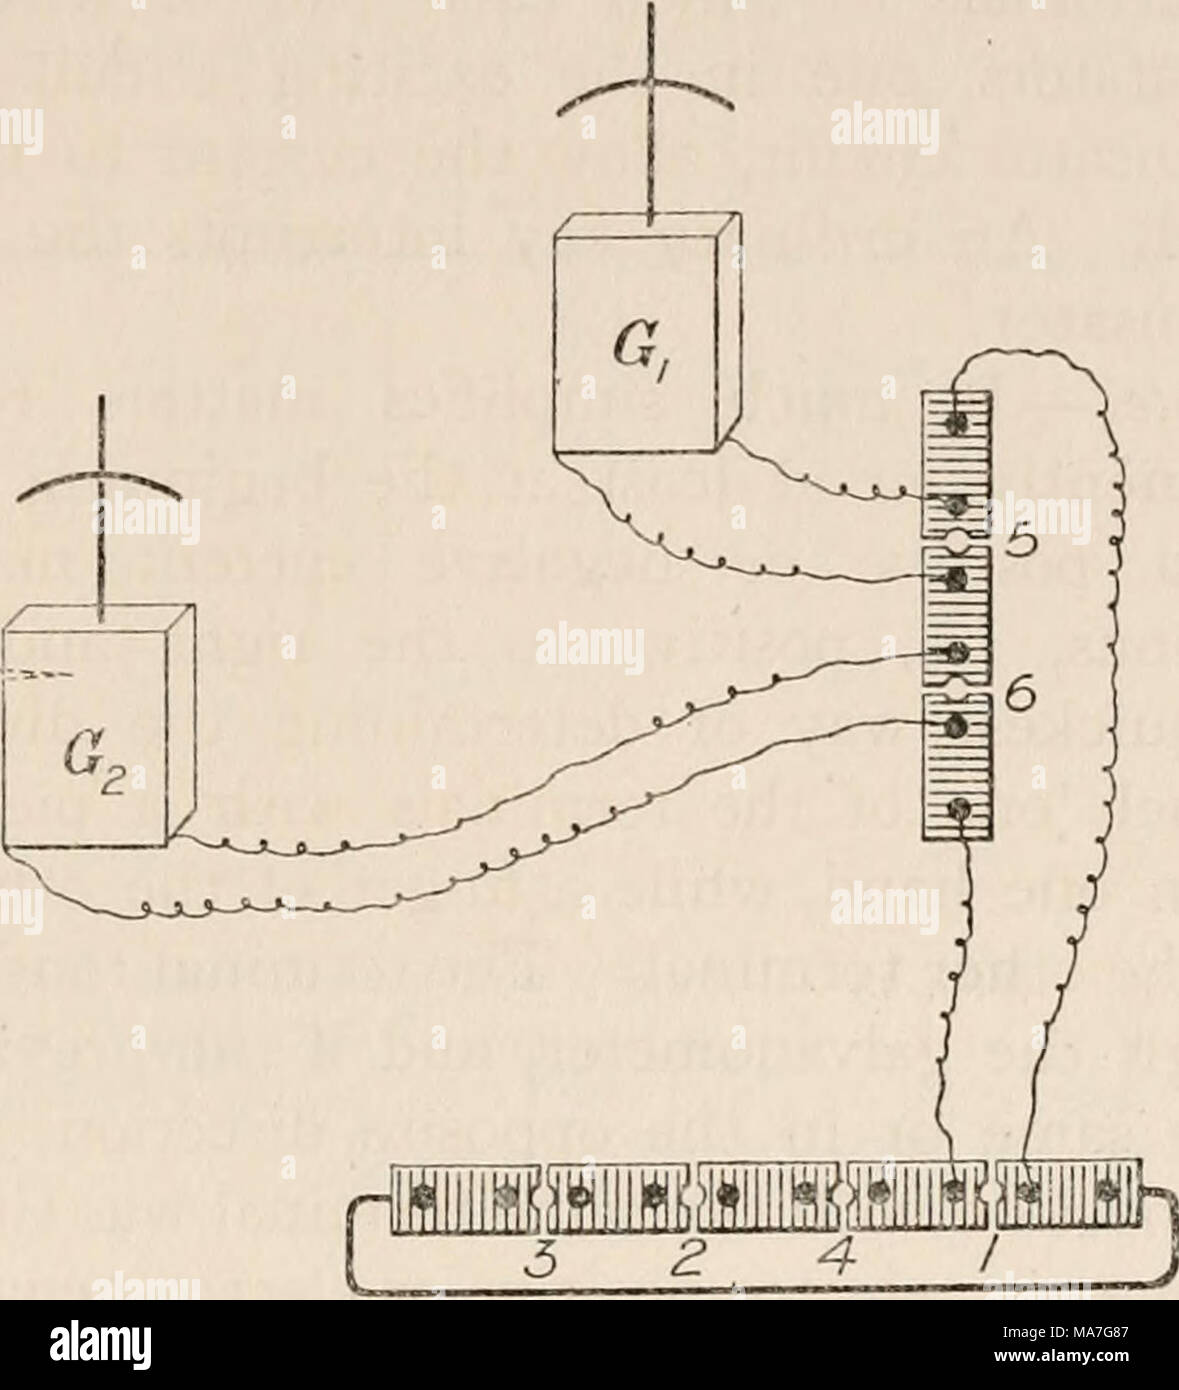 . Eight lectures on the signs of life from their electrical aspect . FlG. 58.—Galvanograph. The most convenient arrangement of the two galvanometers is shown in Fig. 58, in which Gx is the indicator and G2 the recorder, The two galvanometers are controlled simultaneously by plug No. i, separately and individually by plugs No. 5 and 6 of a secondary key- board. We are therefore able to adjust compensation and make any necessary preliminary adjustments with the photographing galvanometer short-circuited at No. 6, and therefore undisturbed by manipulations in the remainder of circuit, where we ar Stock Photo